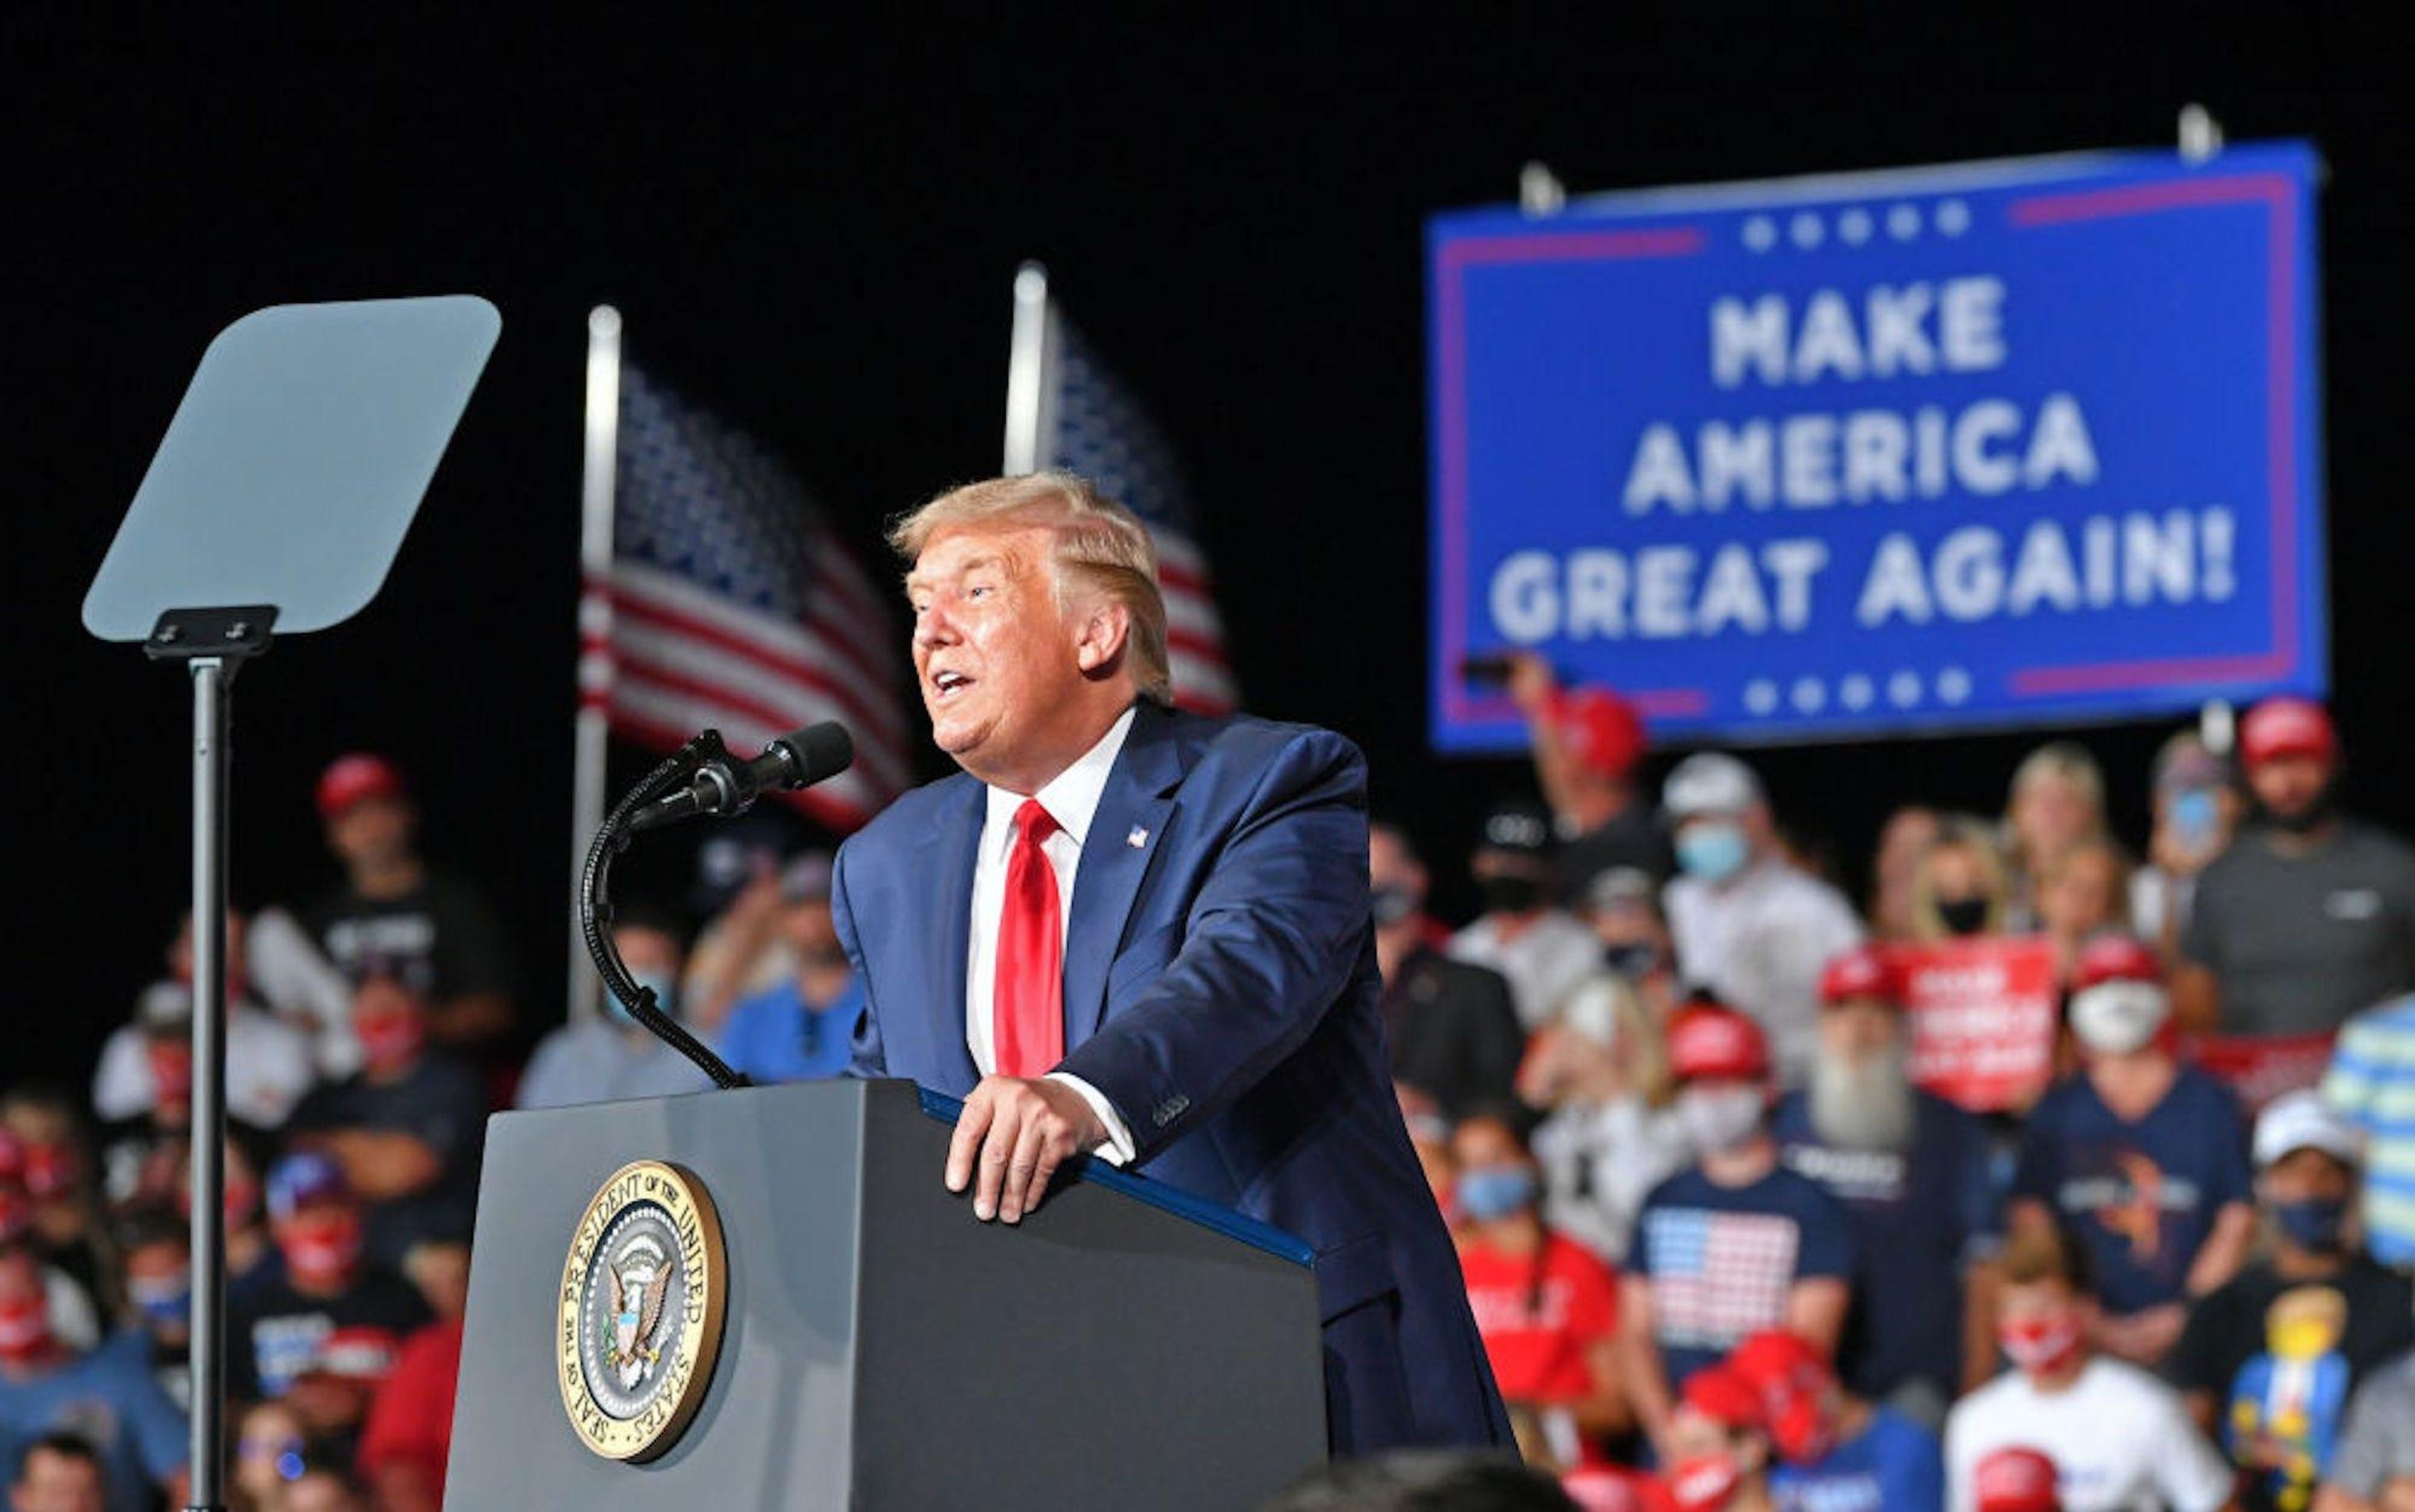 President Trump holds a campaign rally in North Carolina on September 8, 2020. Peter Zay/Anadolu Agency via Getty Images